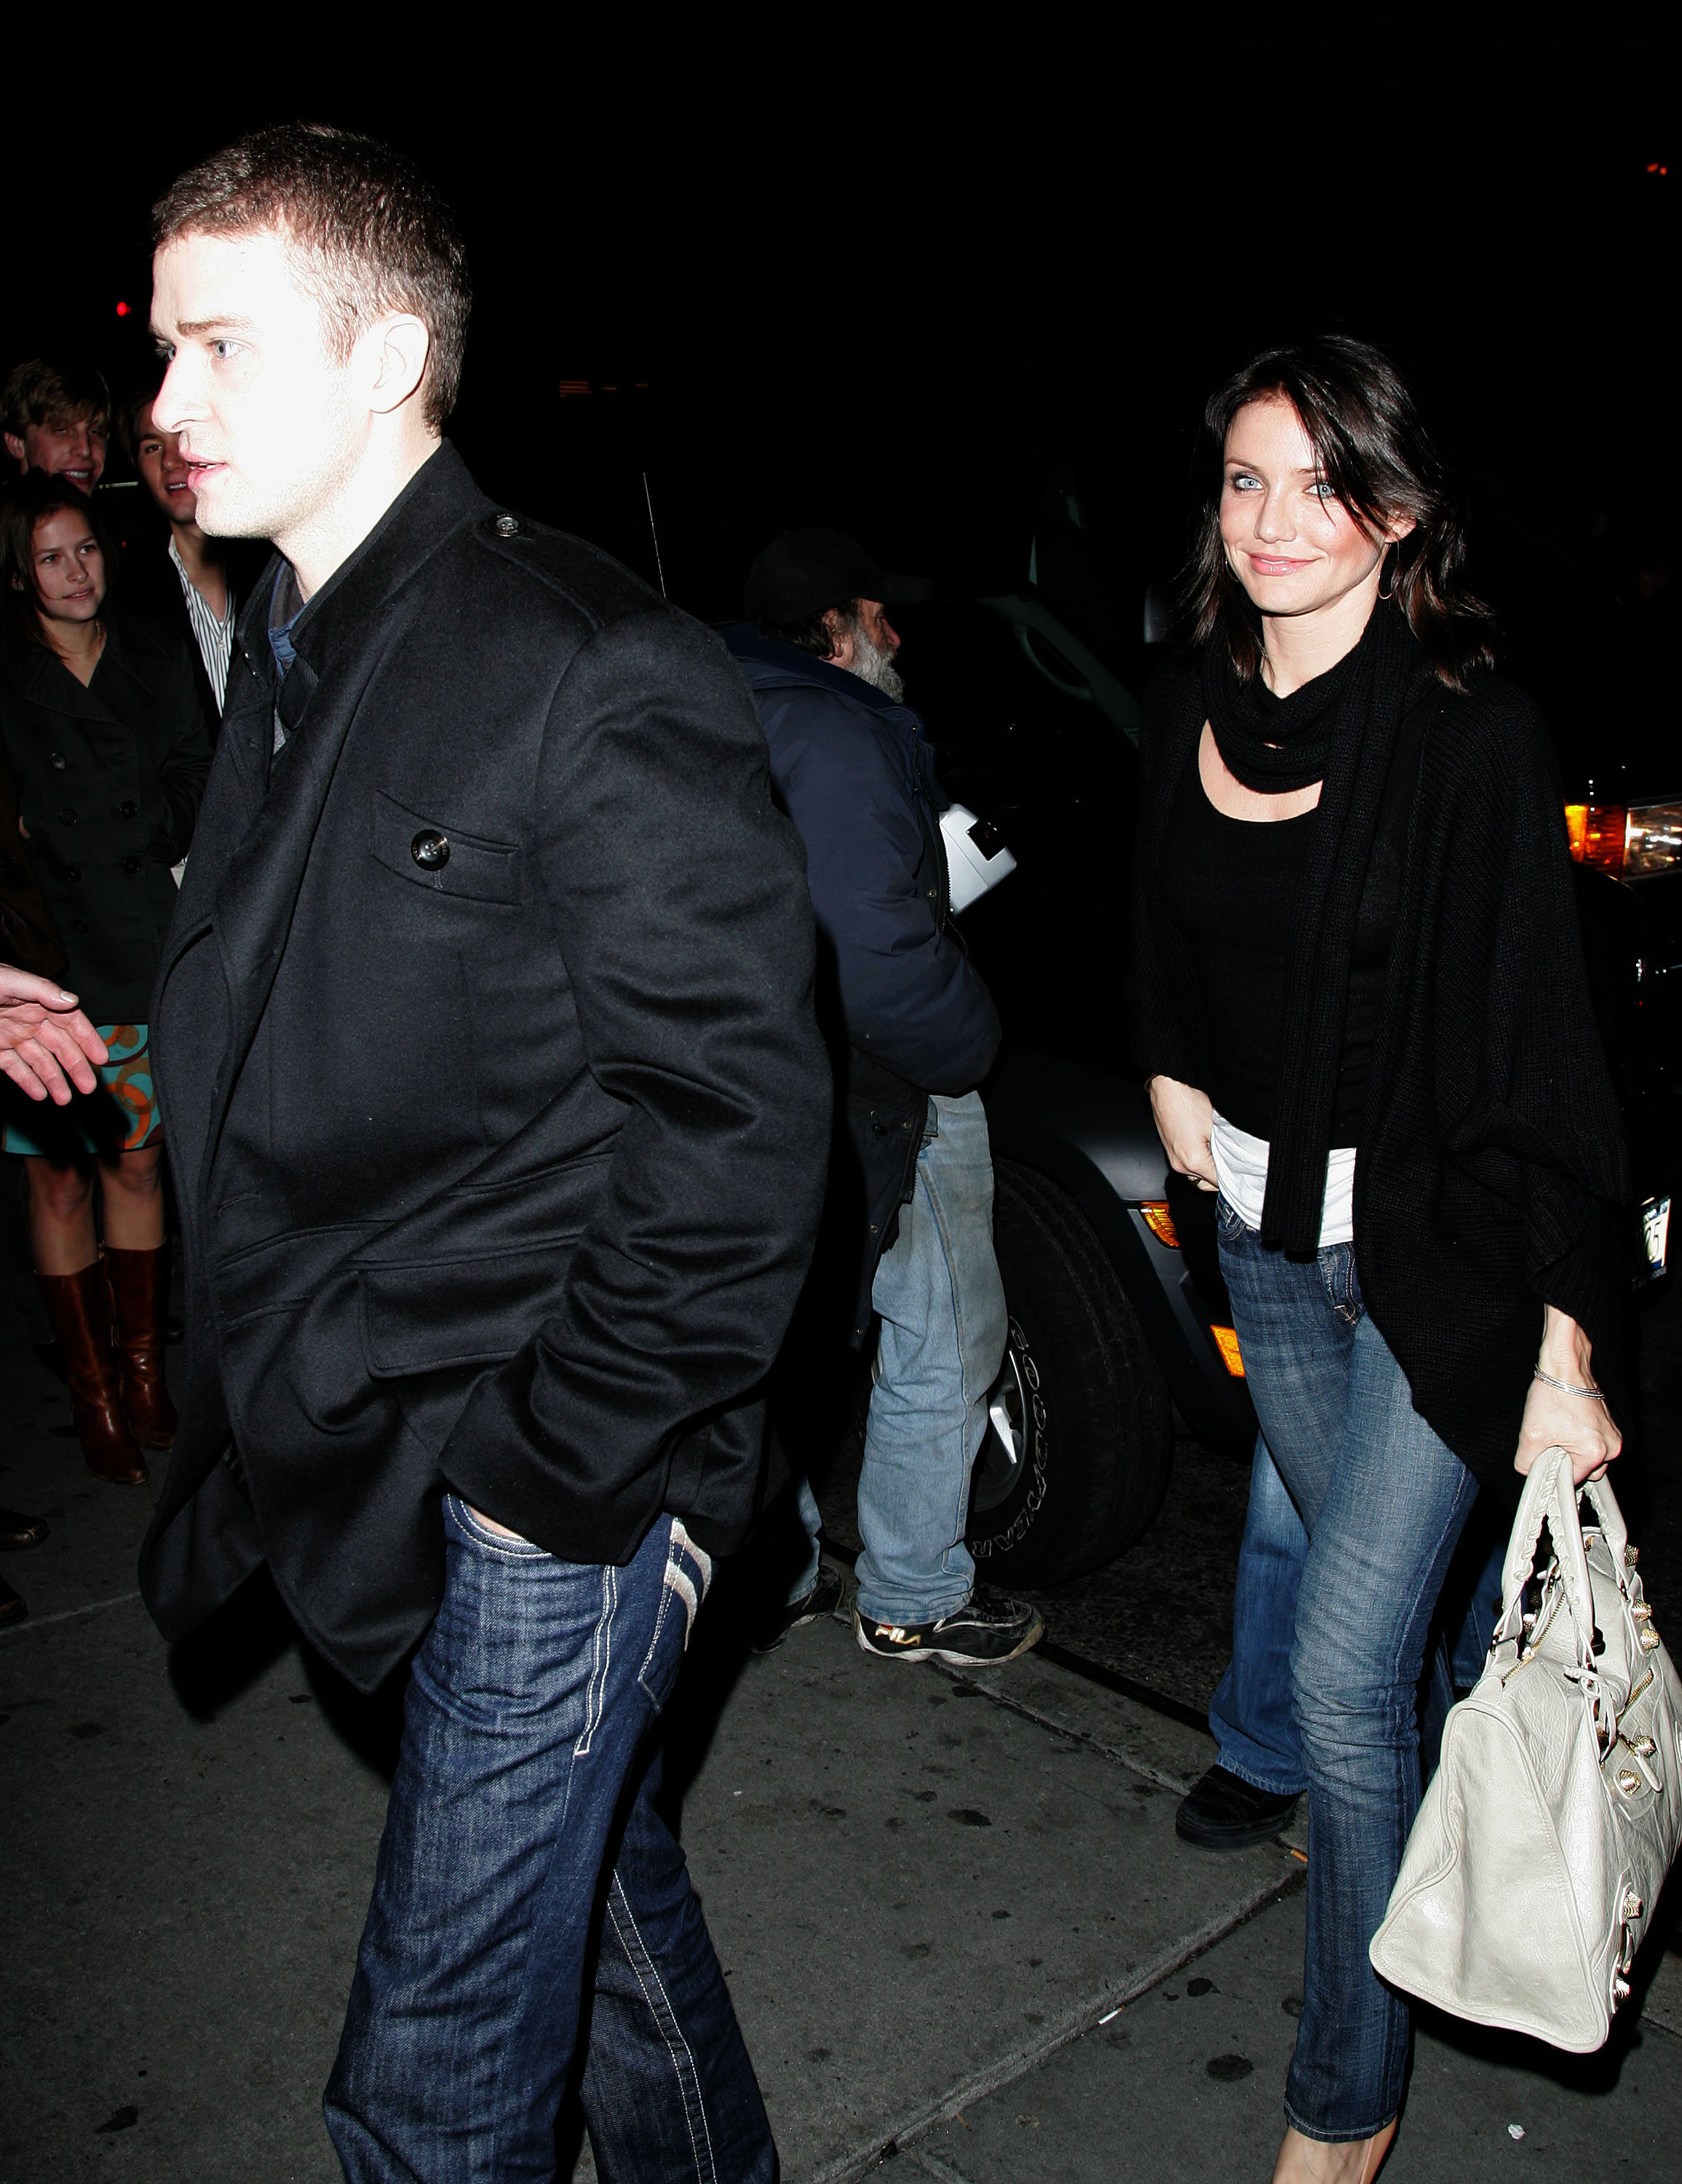 Justin Timberlake and Cameron Diaz in New York City on December 17, 2006 | Source: Getty Images